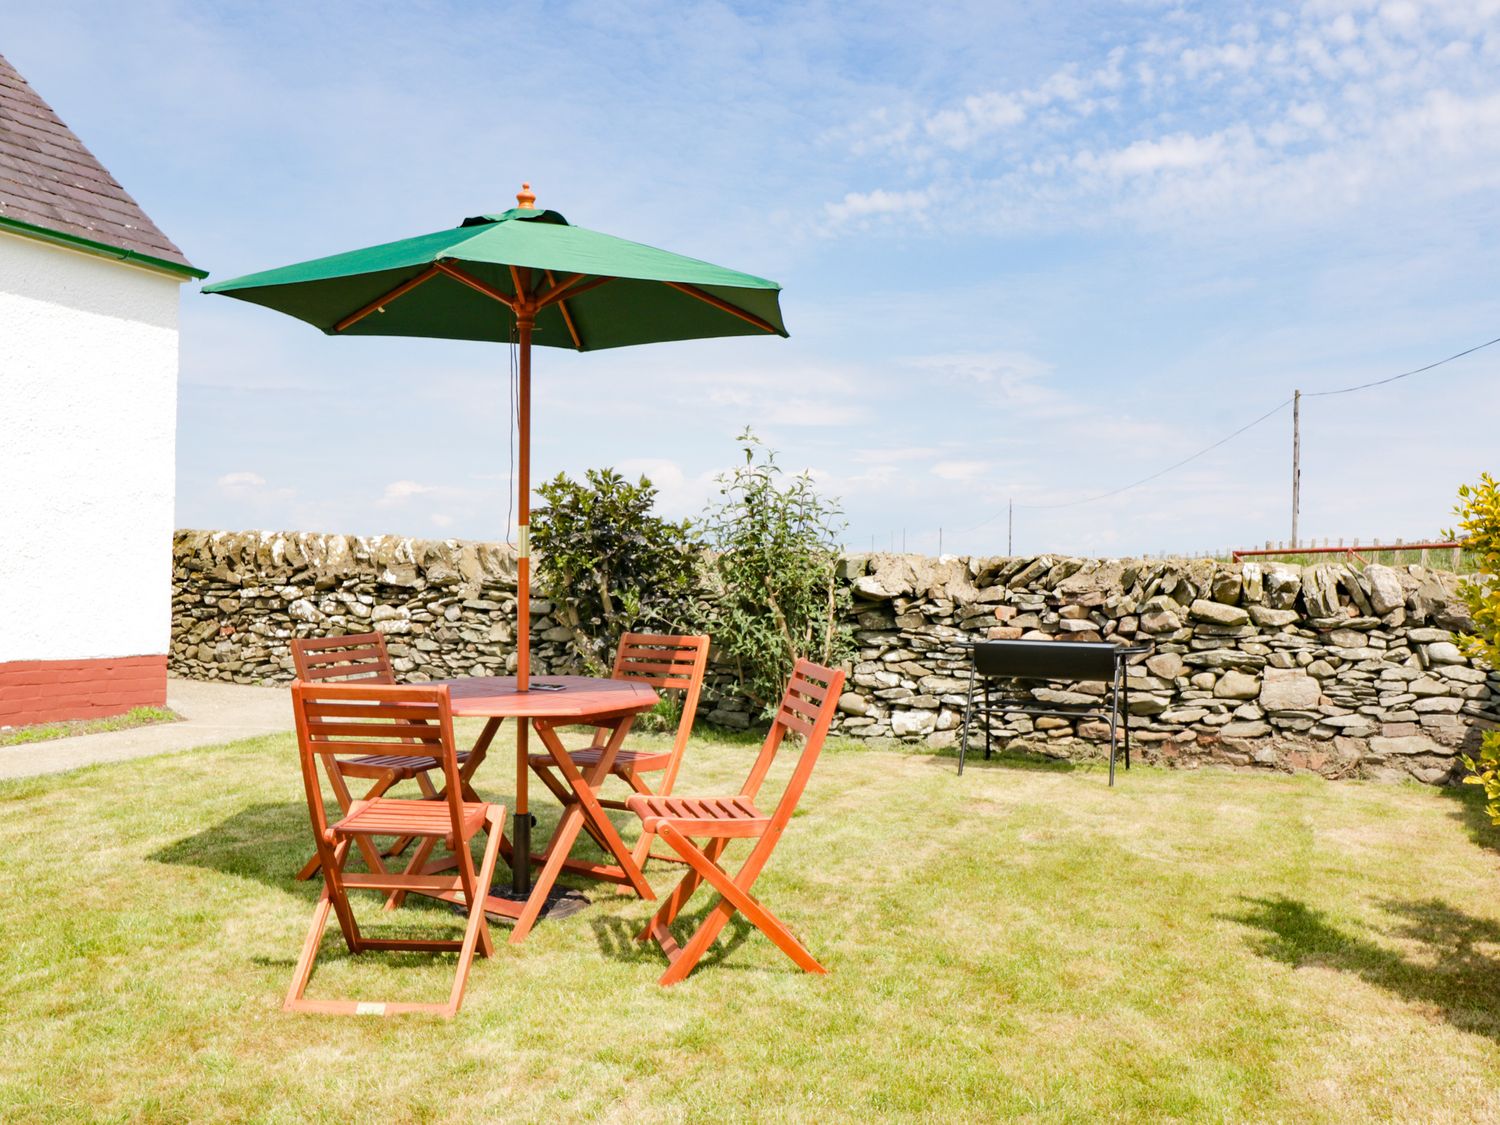 The Dairy Cottage, Whithorn